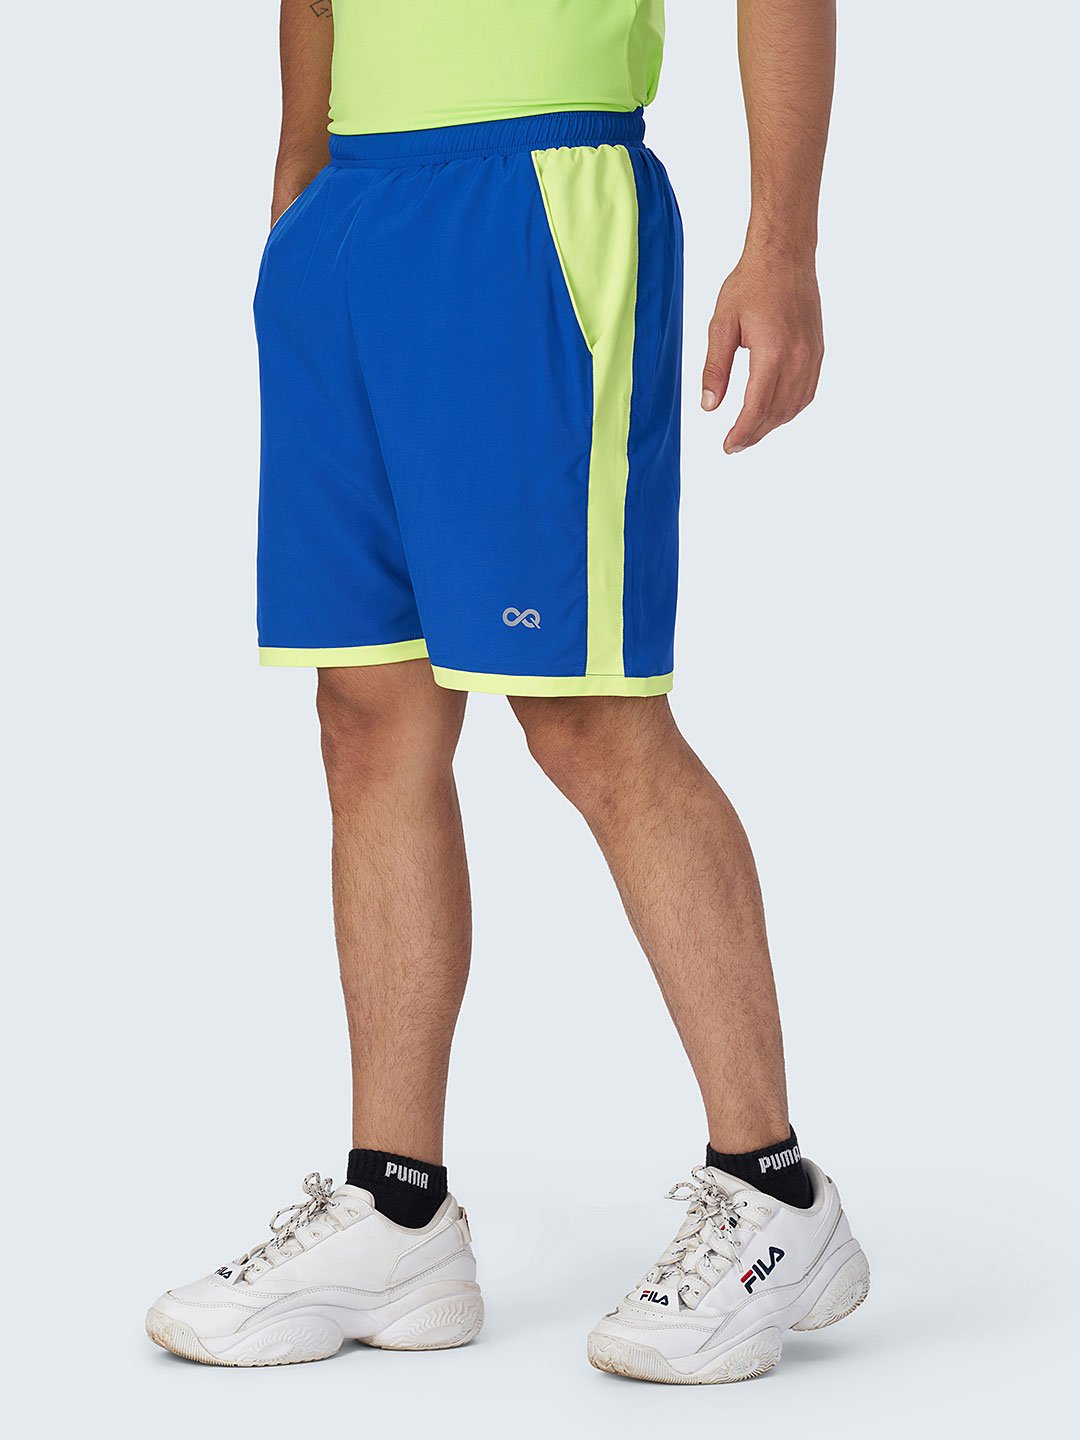 Men's Active Sports Shorts with Side Stripe: Royal Blue